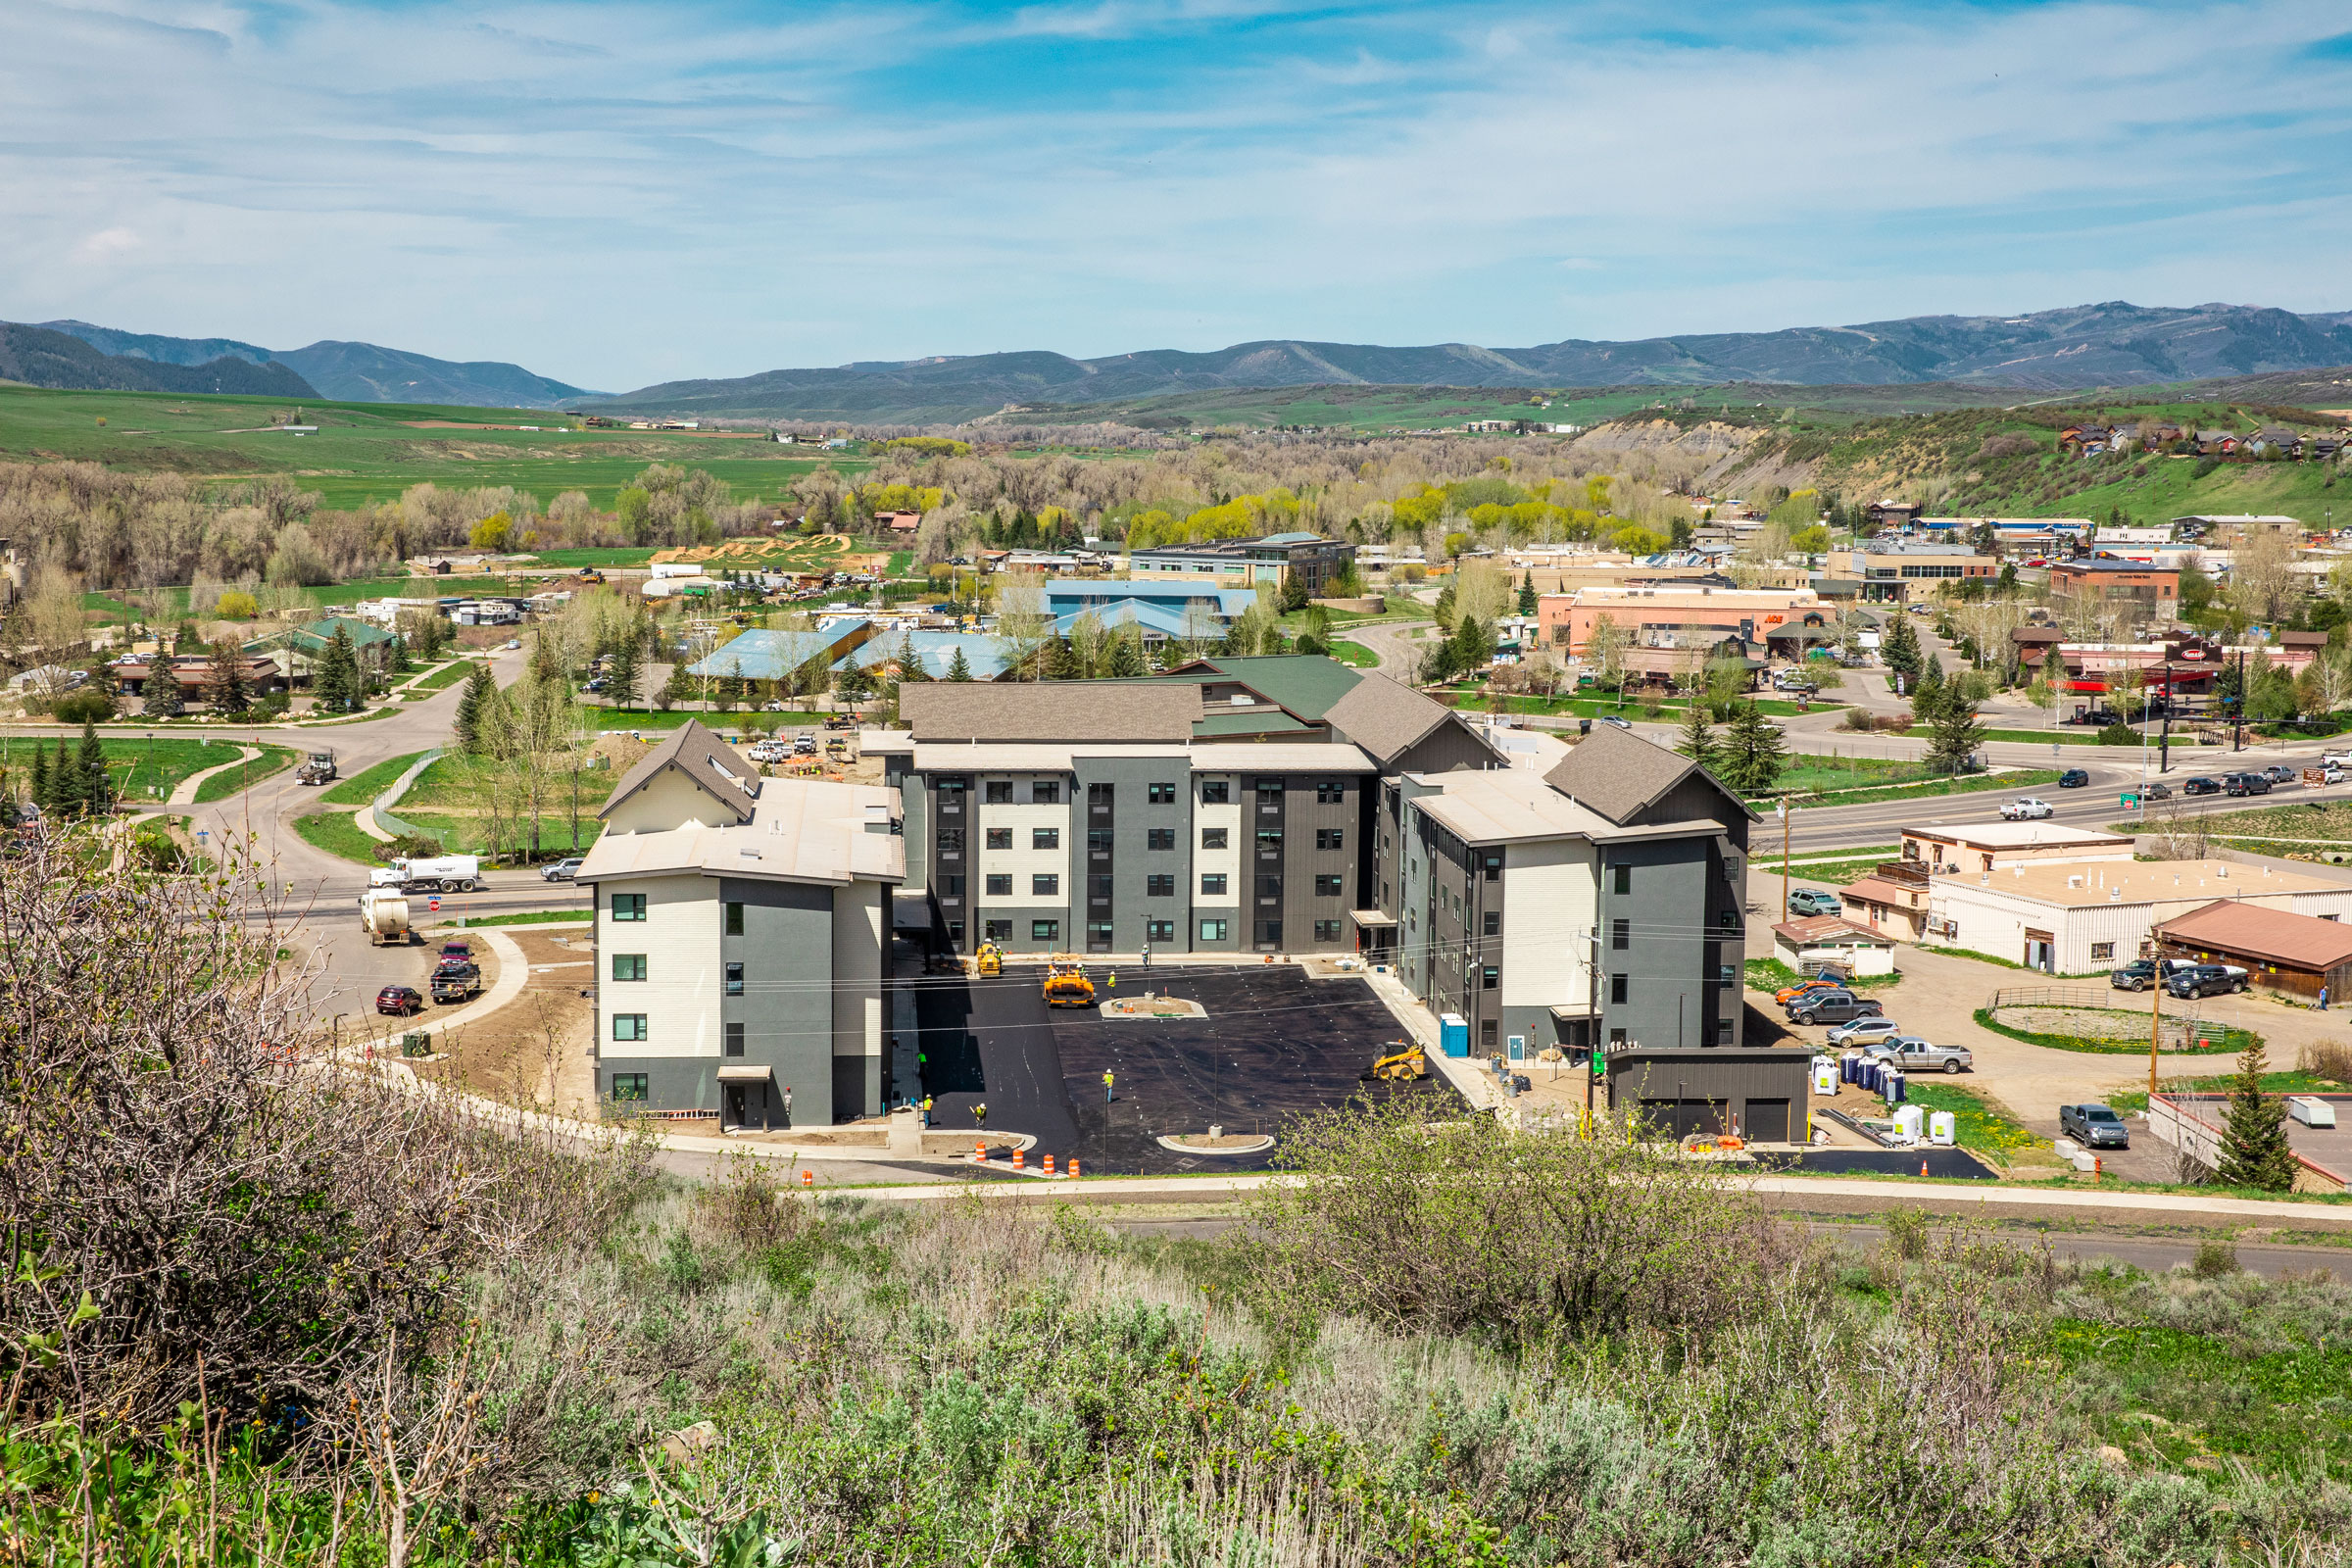 Sunlight Crossing, a 90-unit apartment complex on the west end of Steamboat Springs, Colorado, built by the Yampa Valley Housing Authority and Gorman &amp; Company and Deneuve Construction. (David Williams for TIME)